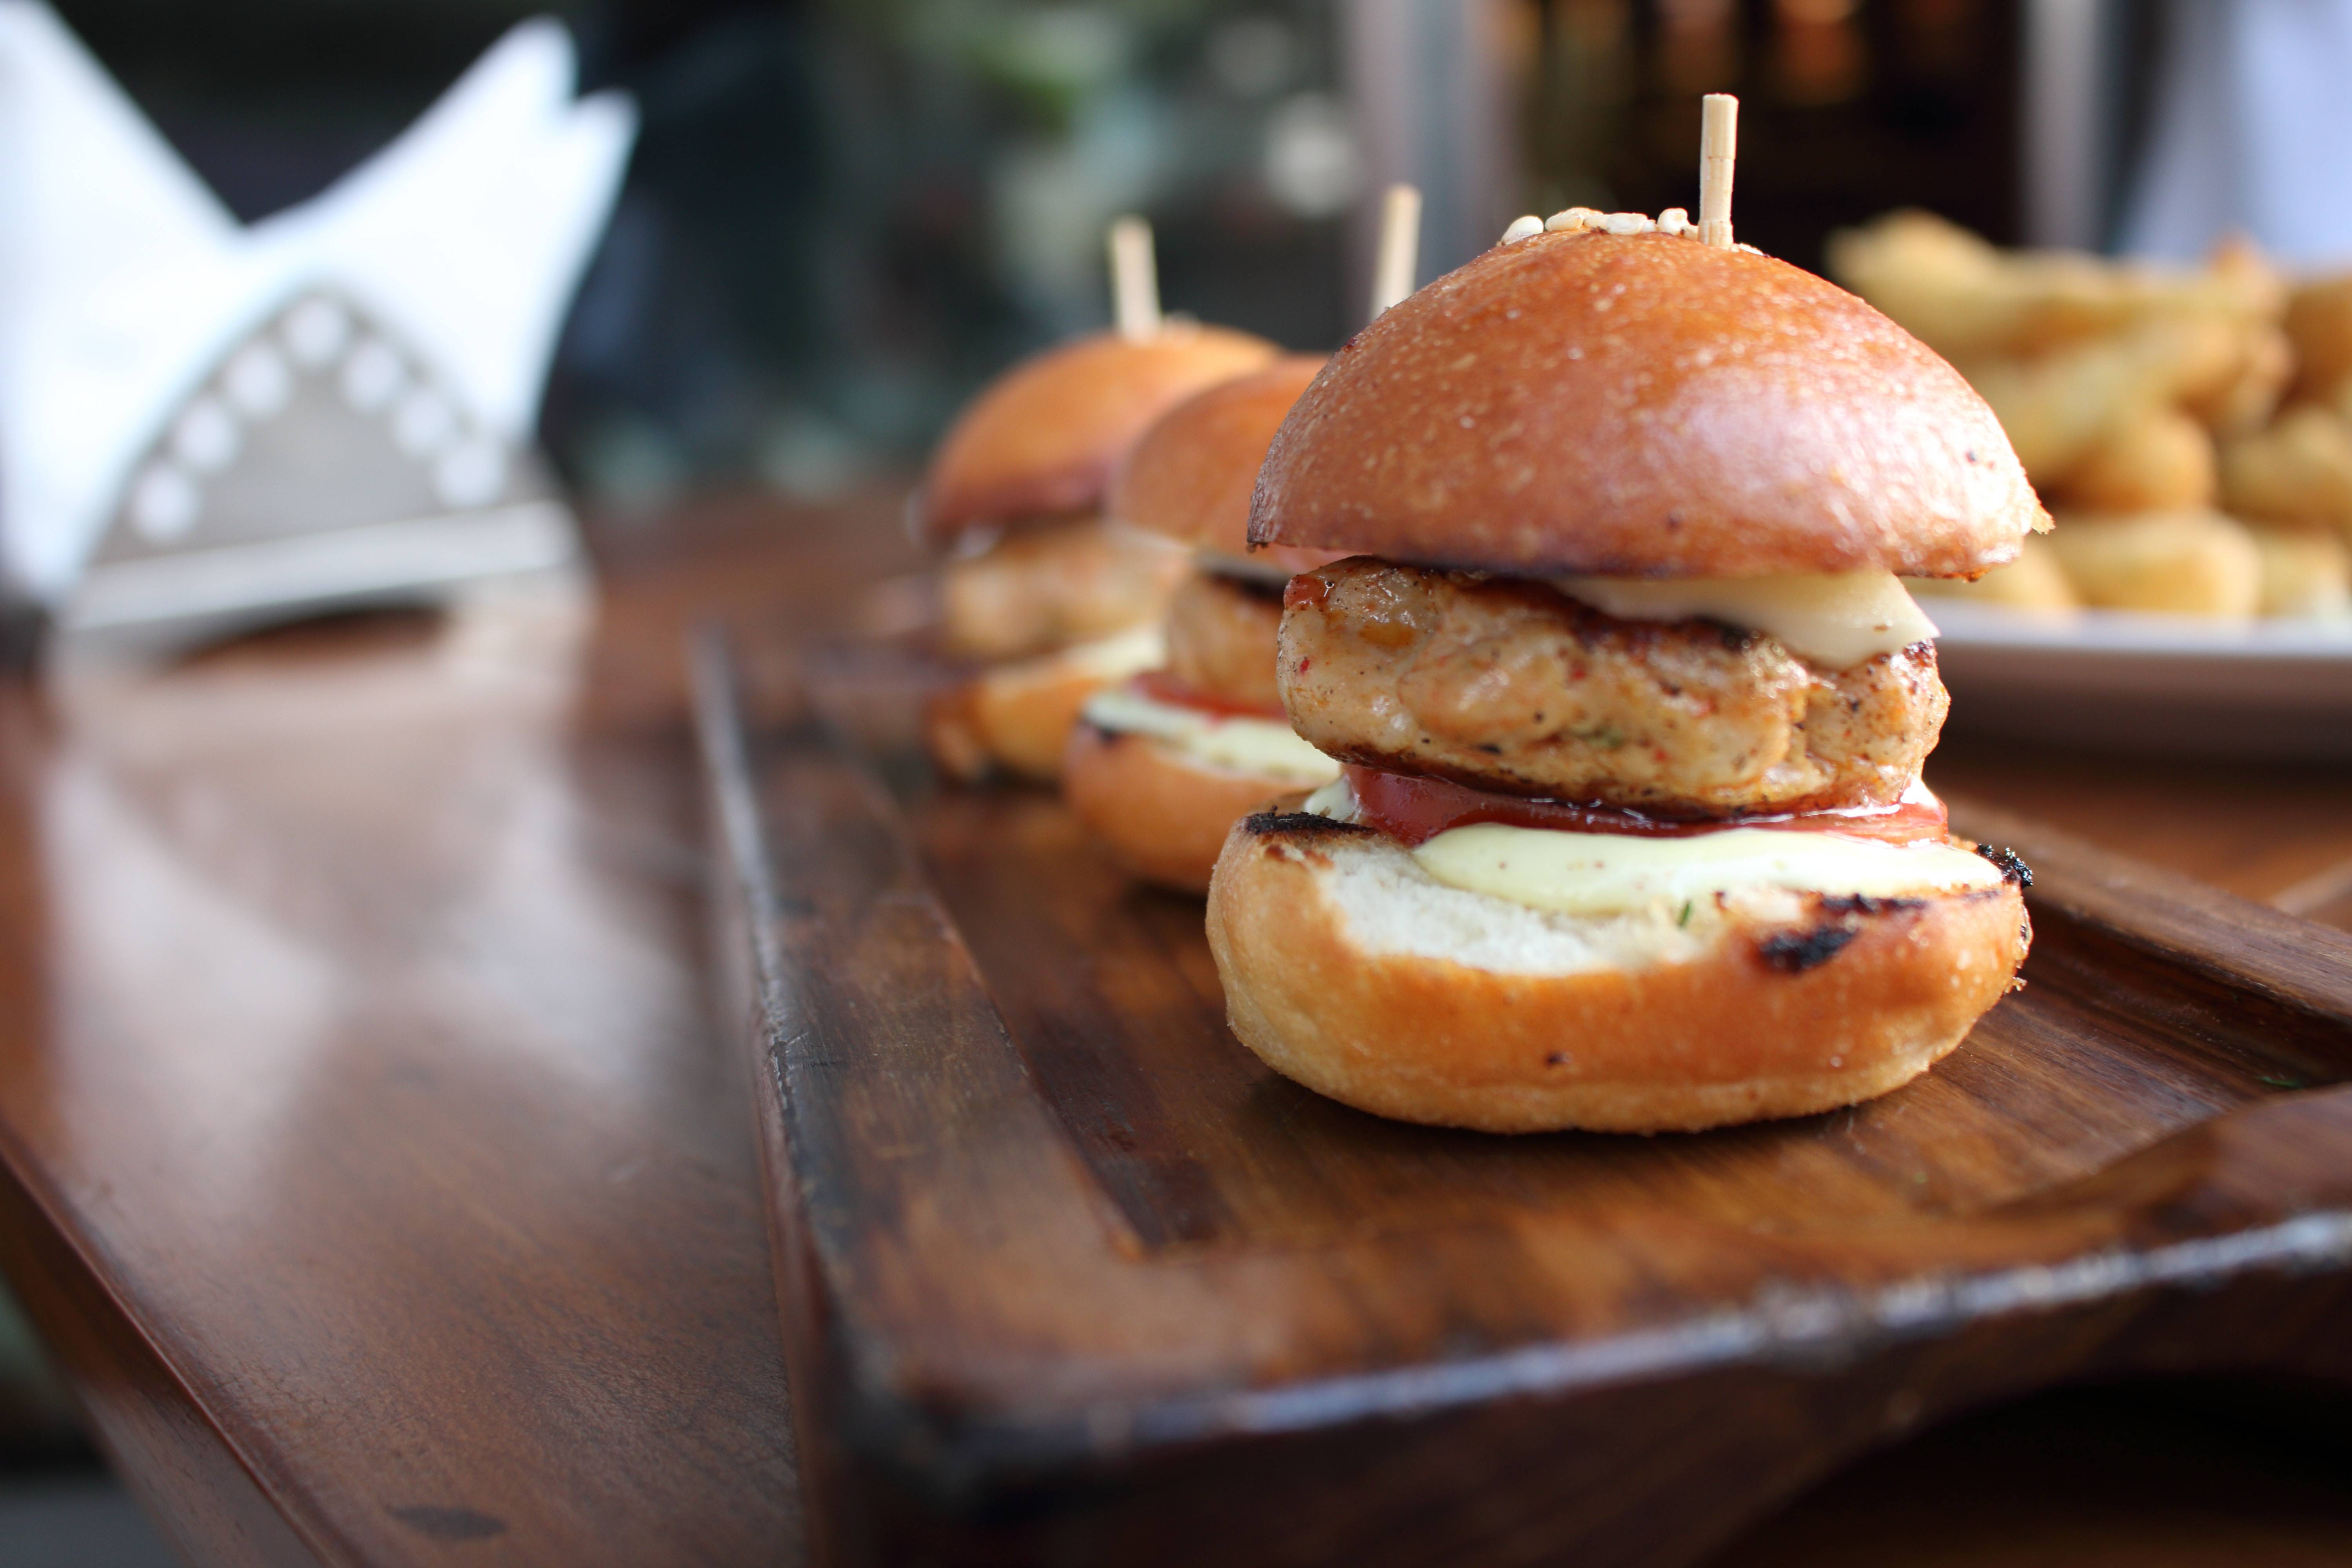 Powerful Marketing Lessons from the Twitter Chicken Sandwich War